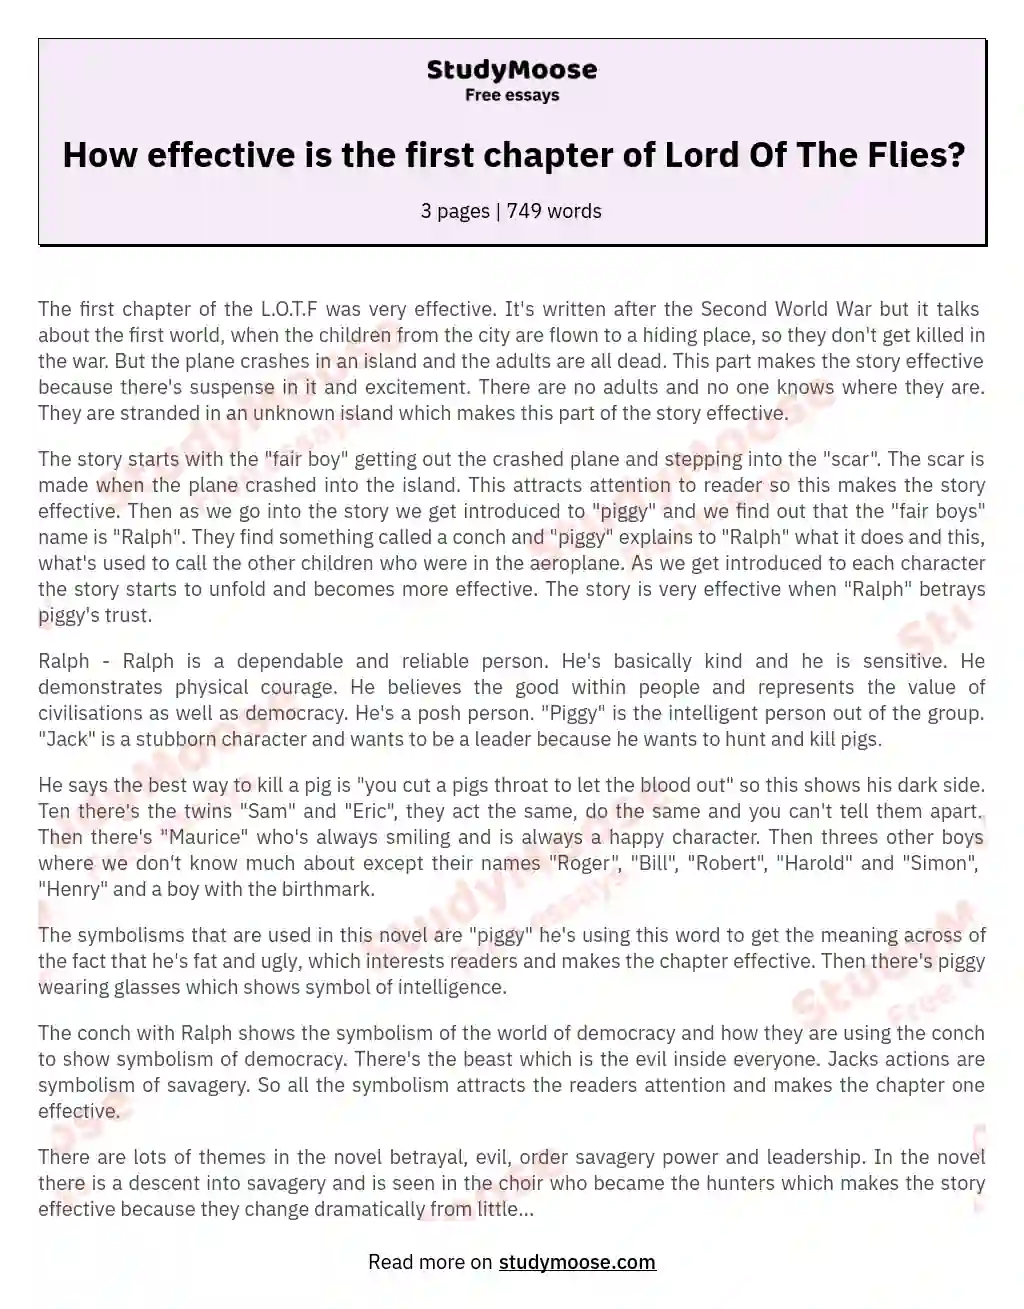 How effective is the first chapter of Lord Of The Flies? essay